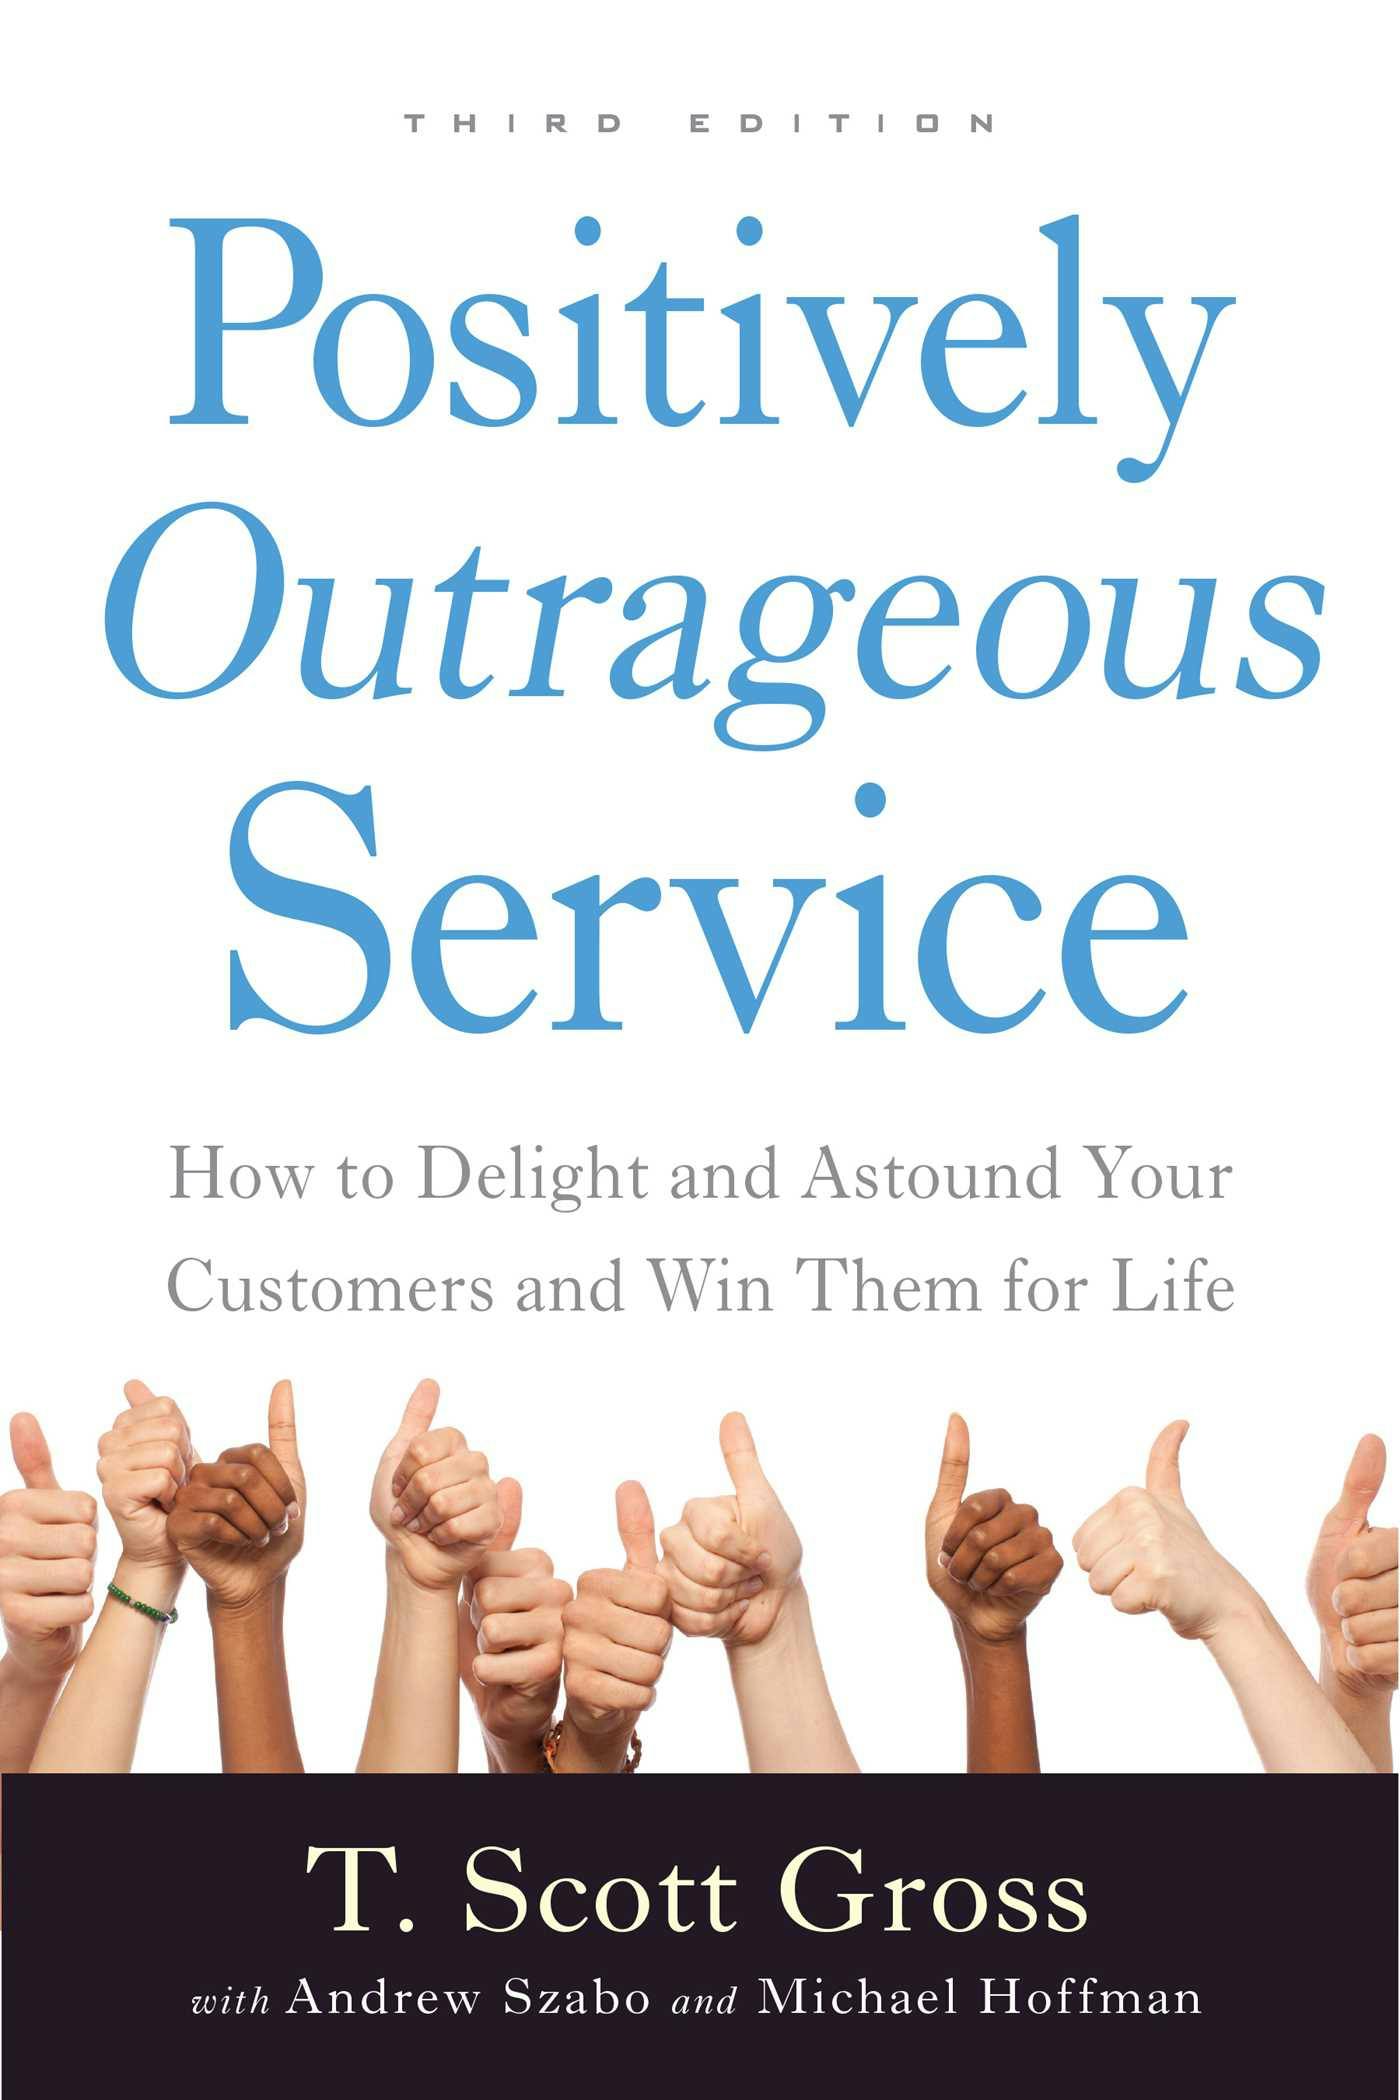 Positively Outrageous Service: How to Delight and Astound Your Customers and Win Them for Life - Michael Hoffman, T. Scott Gross, Andrew Szabo